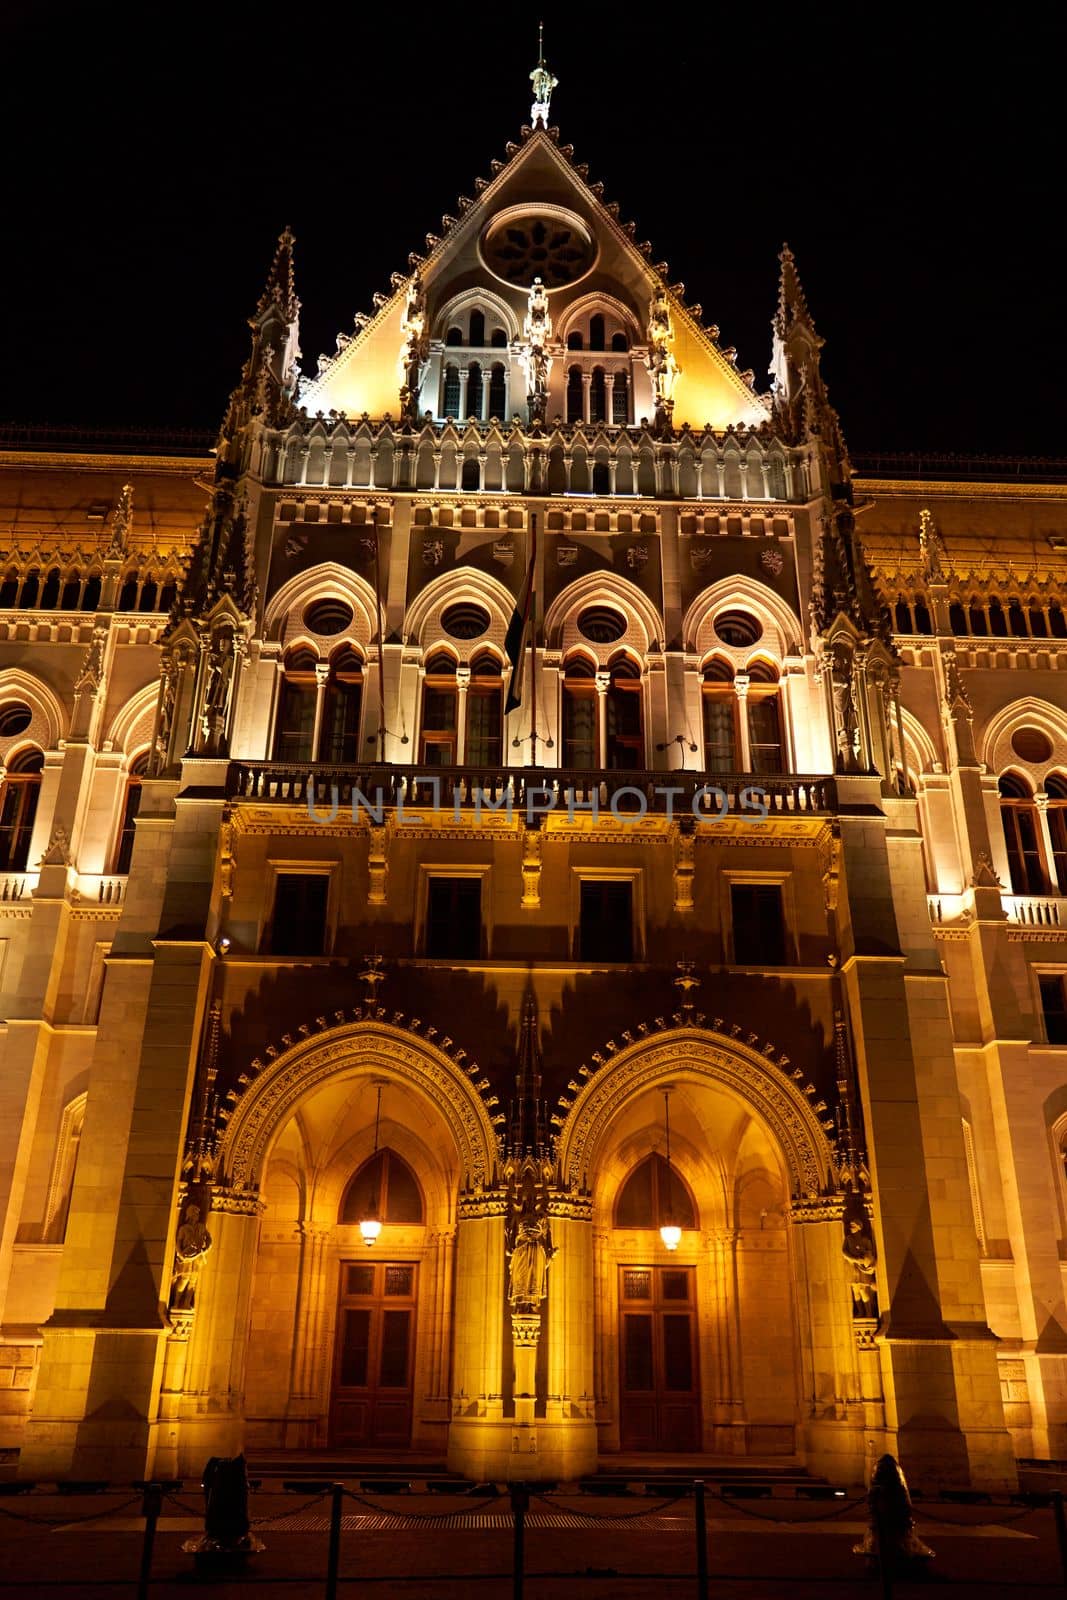 Evening photo of the Parliament building in Budapest.The majestic Saxon architecture is illuminated with warm yellow light. Budapest, Hungary - 08.24.2022